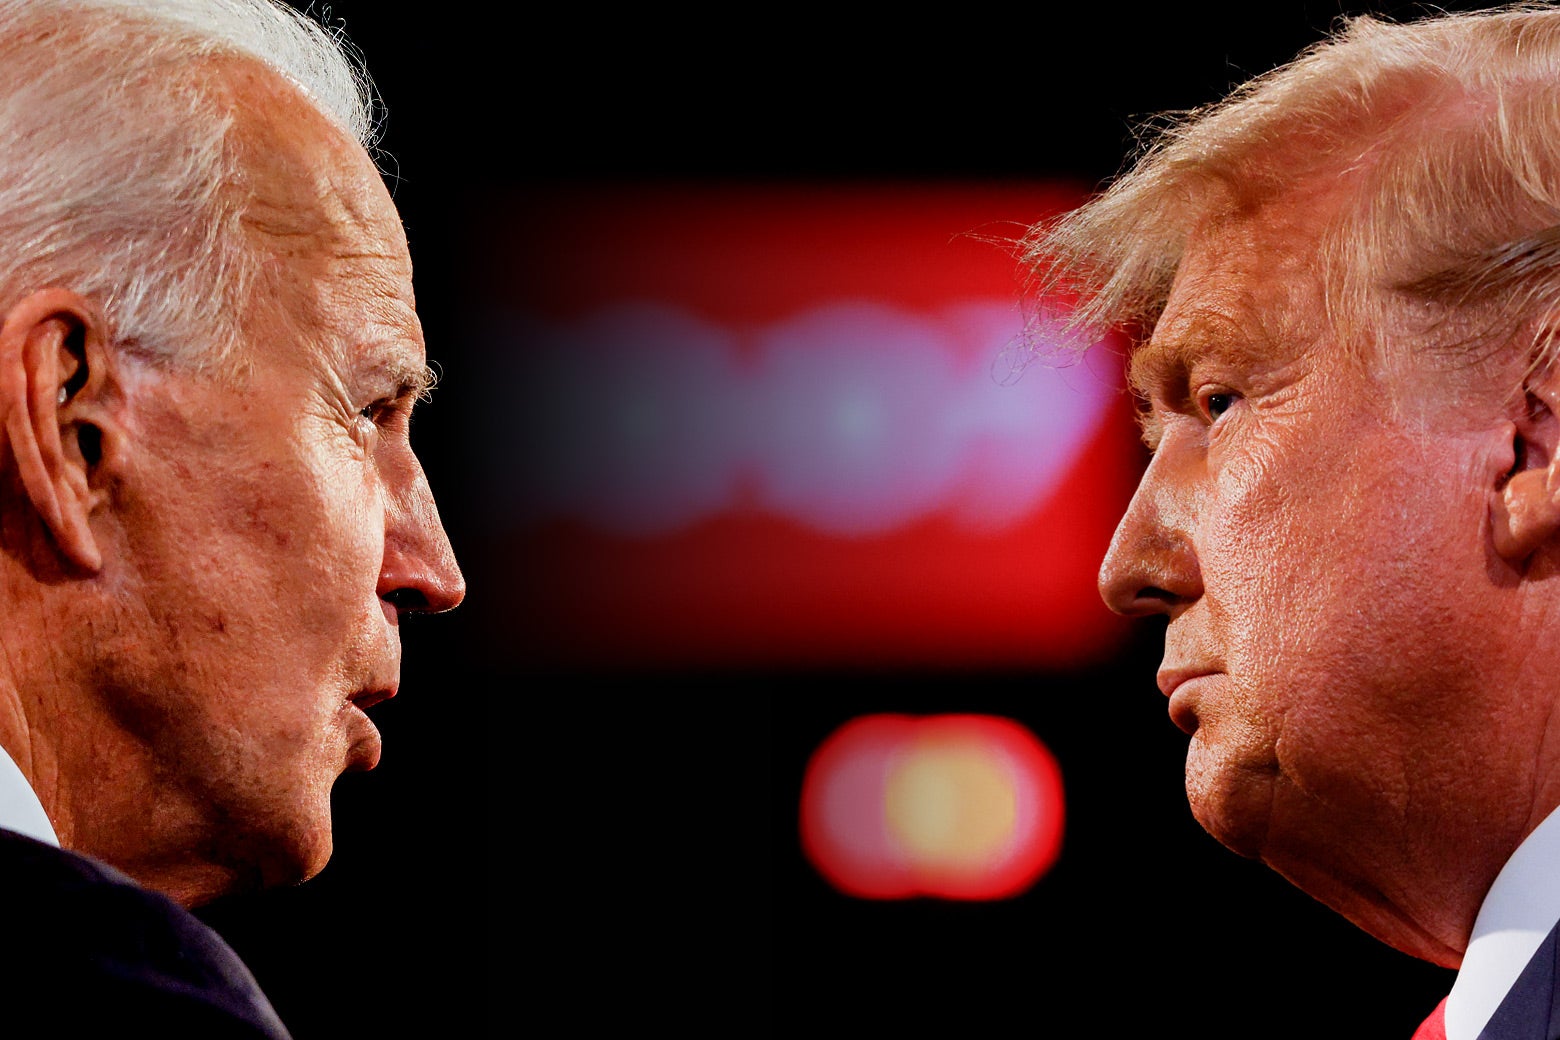 How Trump Is Trying to Dodge a Debate Trap That Republicans Often Fall Into With Biden